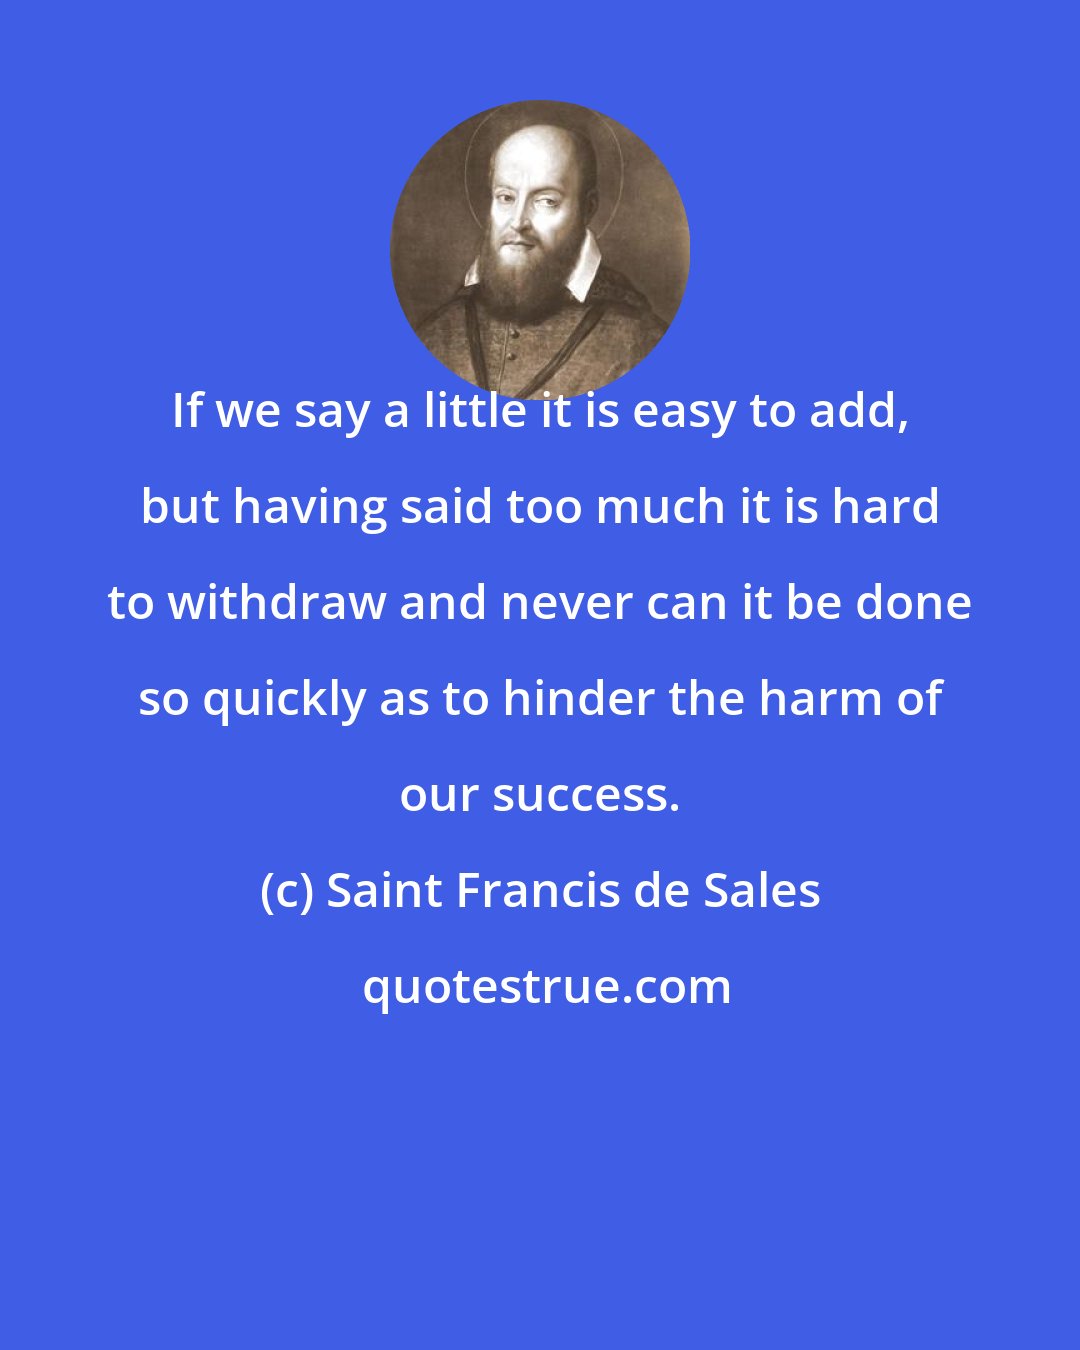 Saint Francis de Sales: If we say a little it is easy to add, but having said too much it is hard to withdraw and never can it be done so quickly as to hinder the harm of our success.